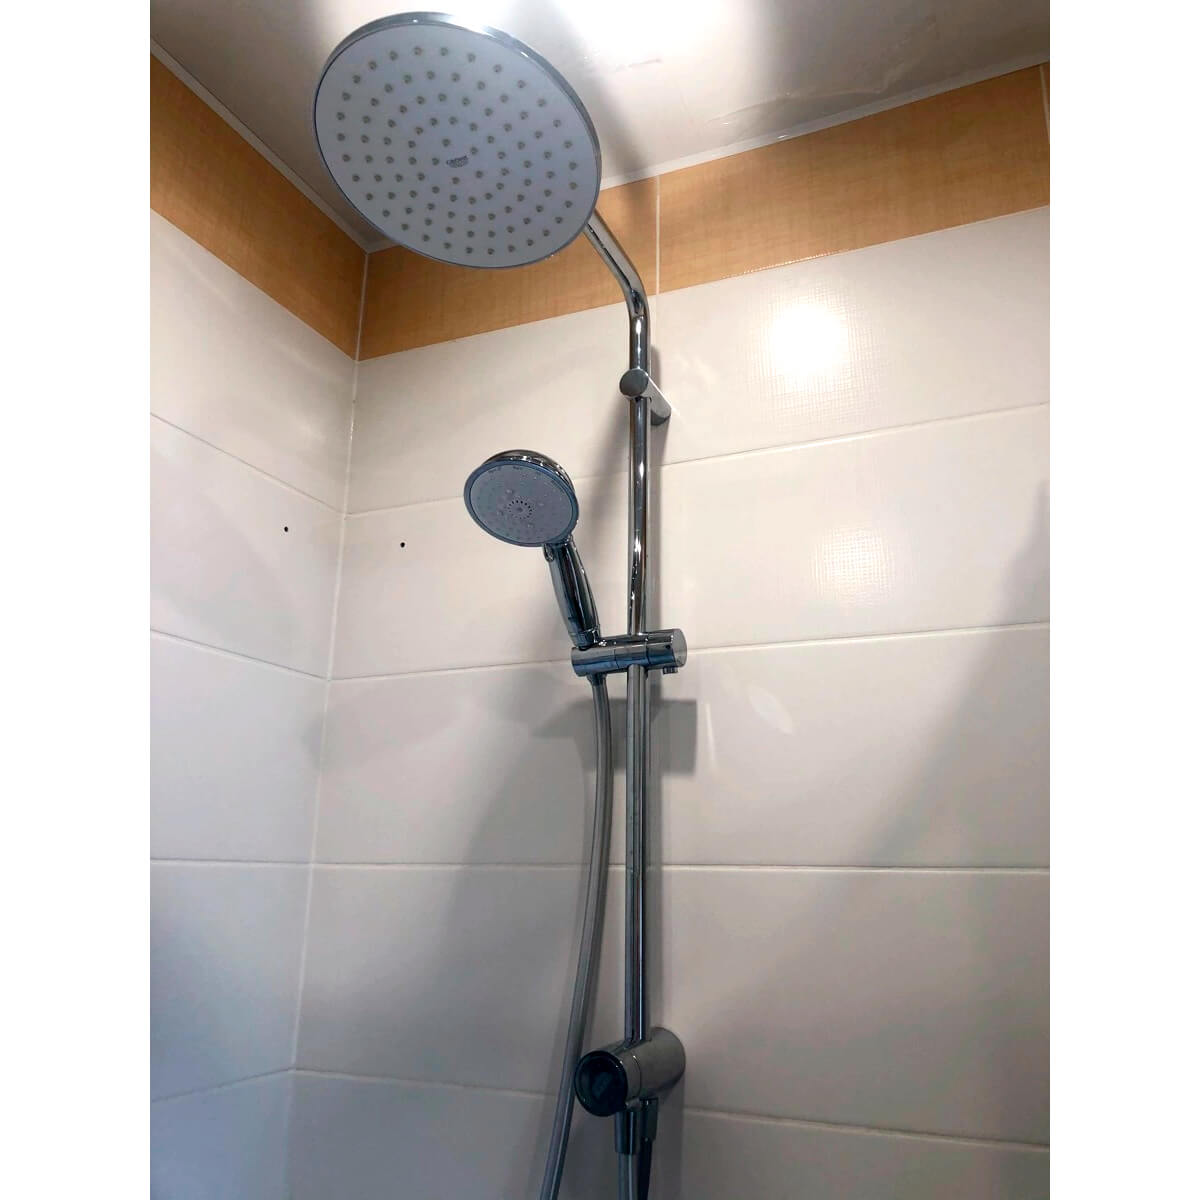 New tempesta 200. Душевая стойка Grohe New Tempesta Rustic 27399002 хром. Душевая система Grohe New Tempesta 200. Grohe New Tempesta Rustic System 200. 27399002 Grohe.